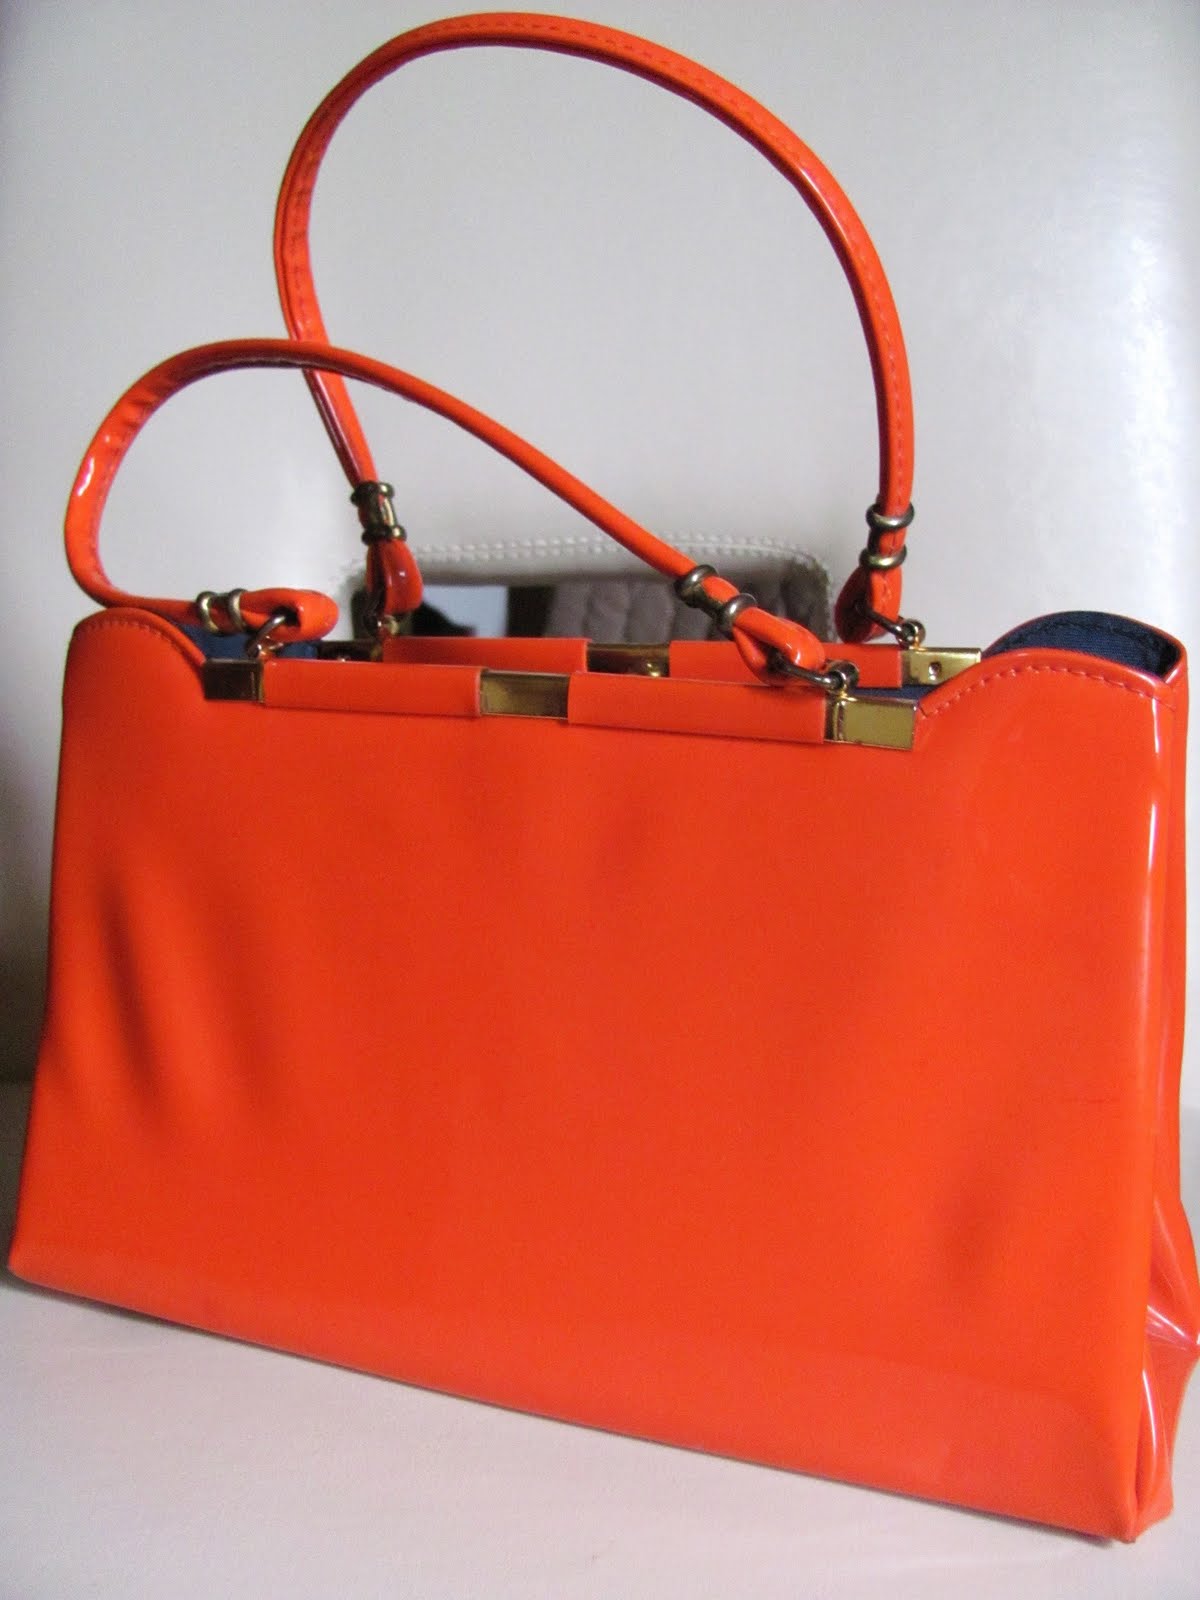 Pies and Aprons: Collecting: Vintage handbags